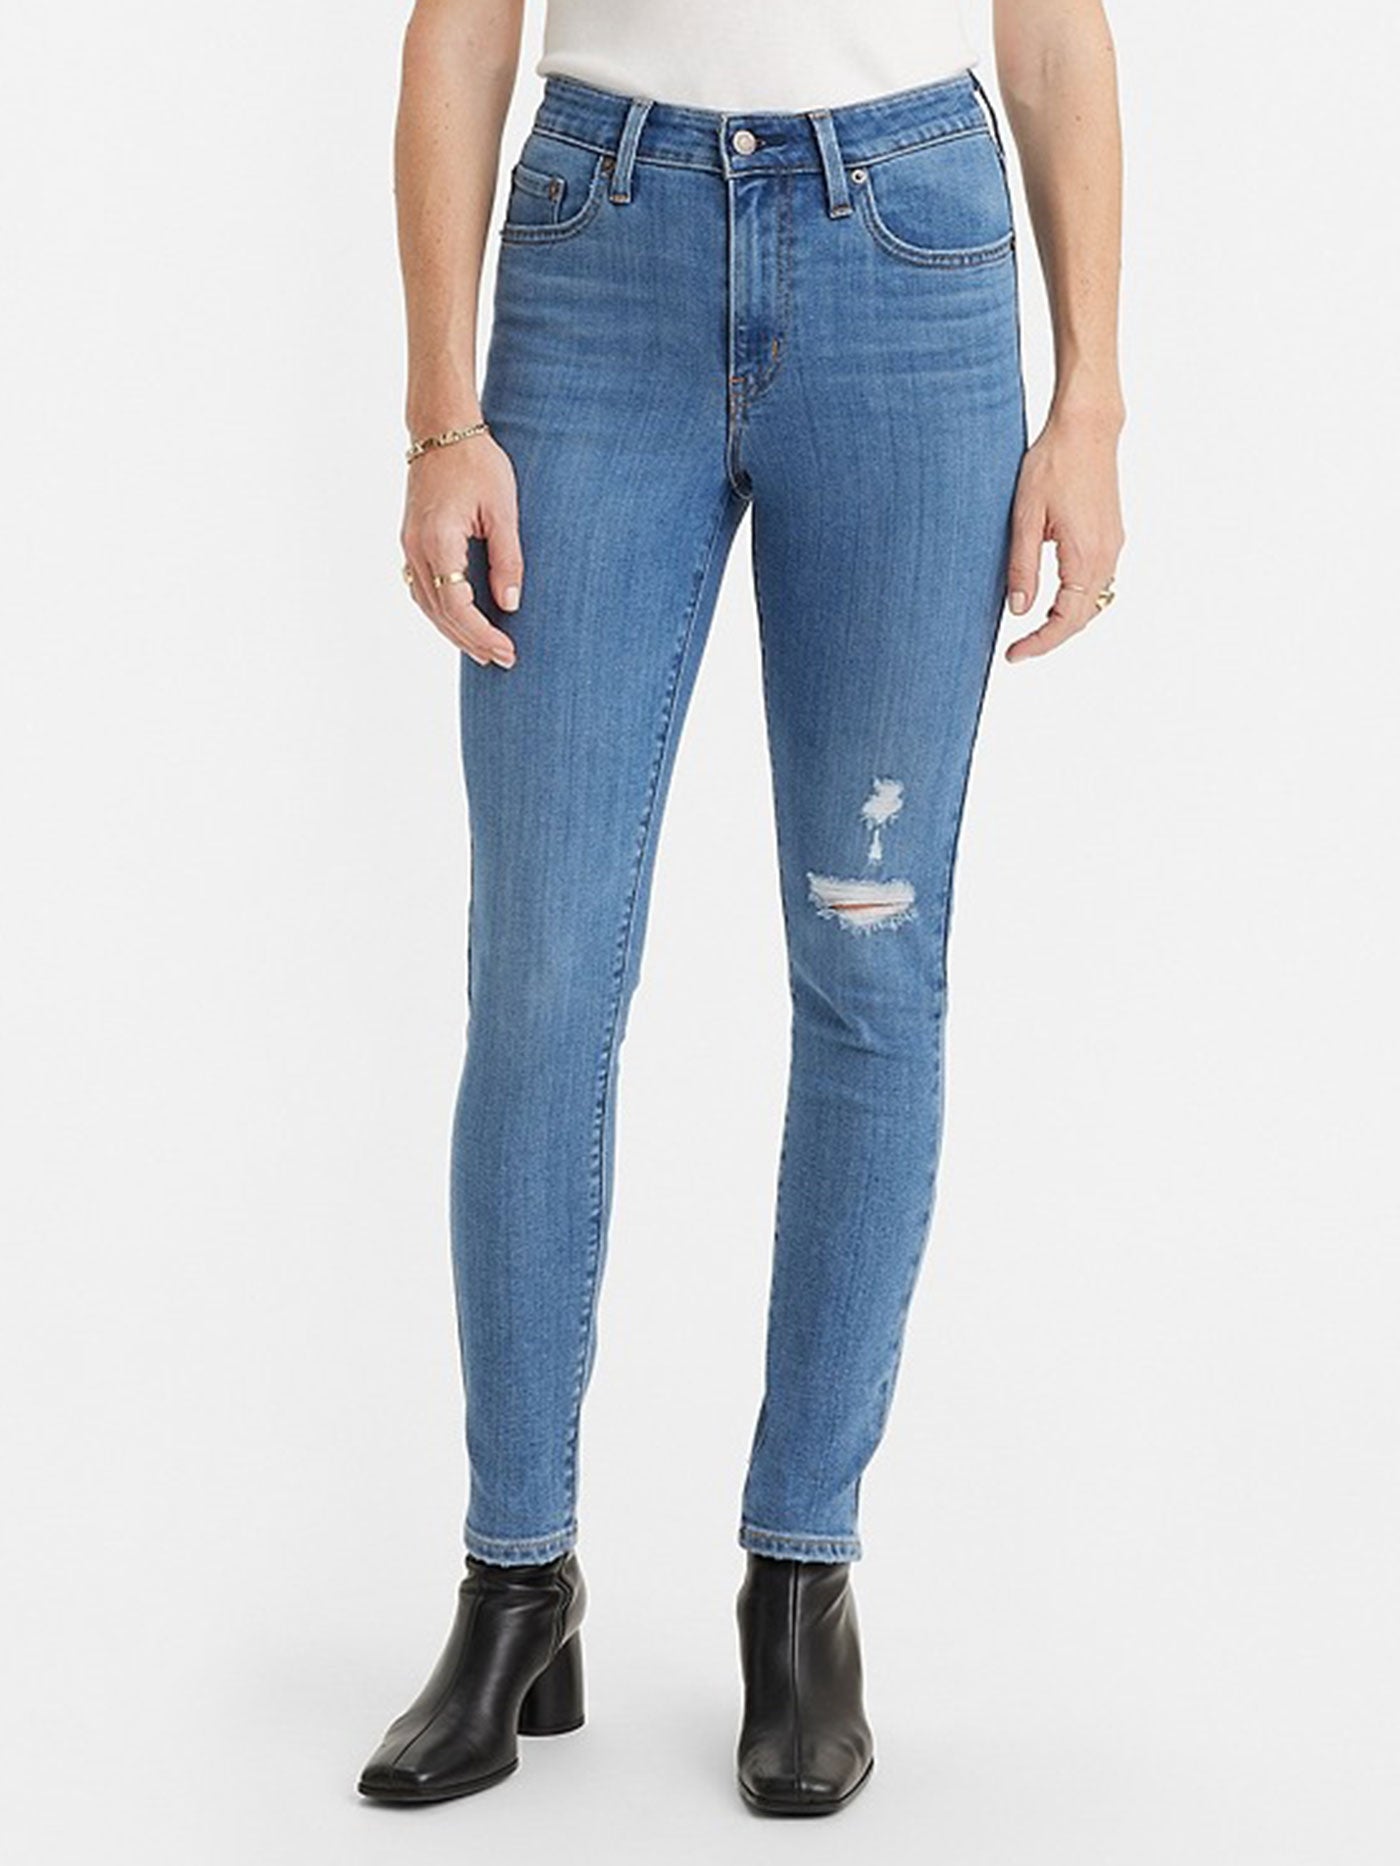 Levis Spring 2023 721 High Rise Skinny Chelsea Bend Jeans | EMPIRE